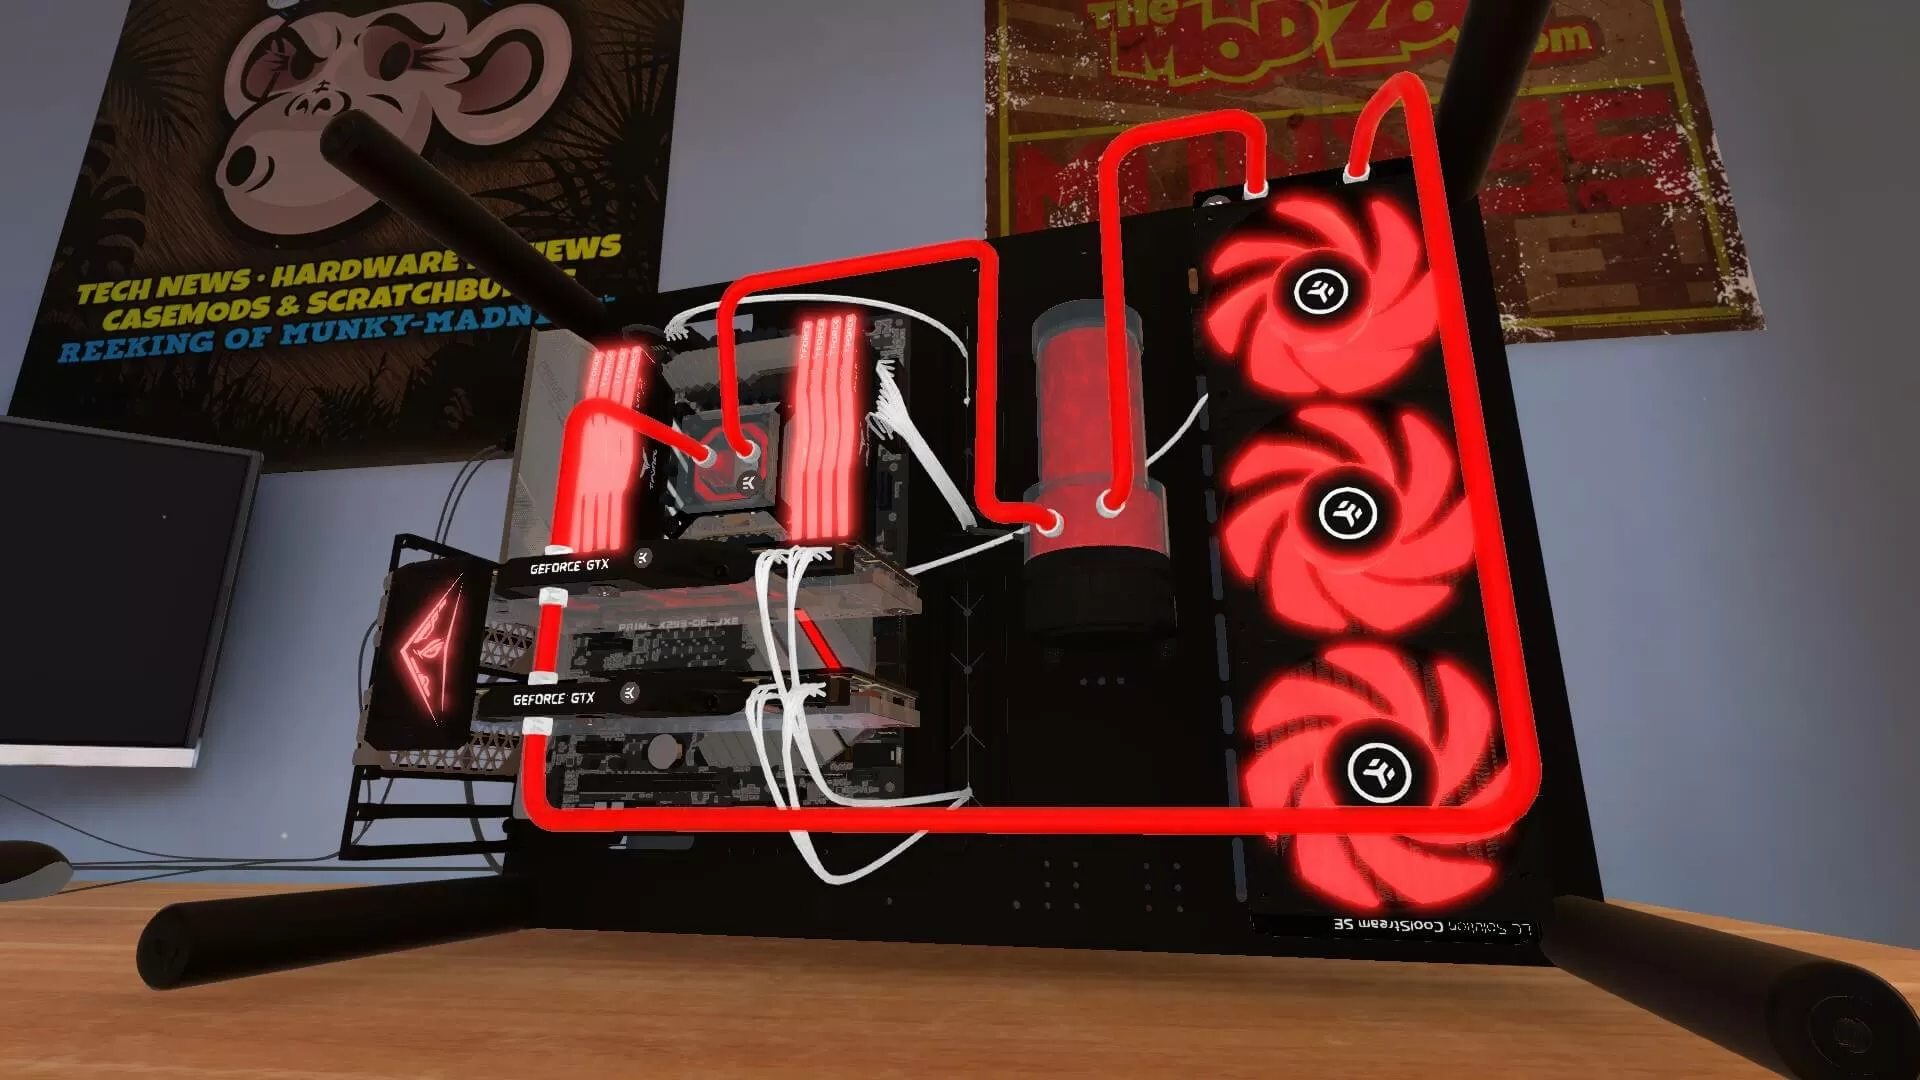 PC Building Simulator exits Steam Early Access, adds Nvidia hardware